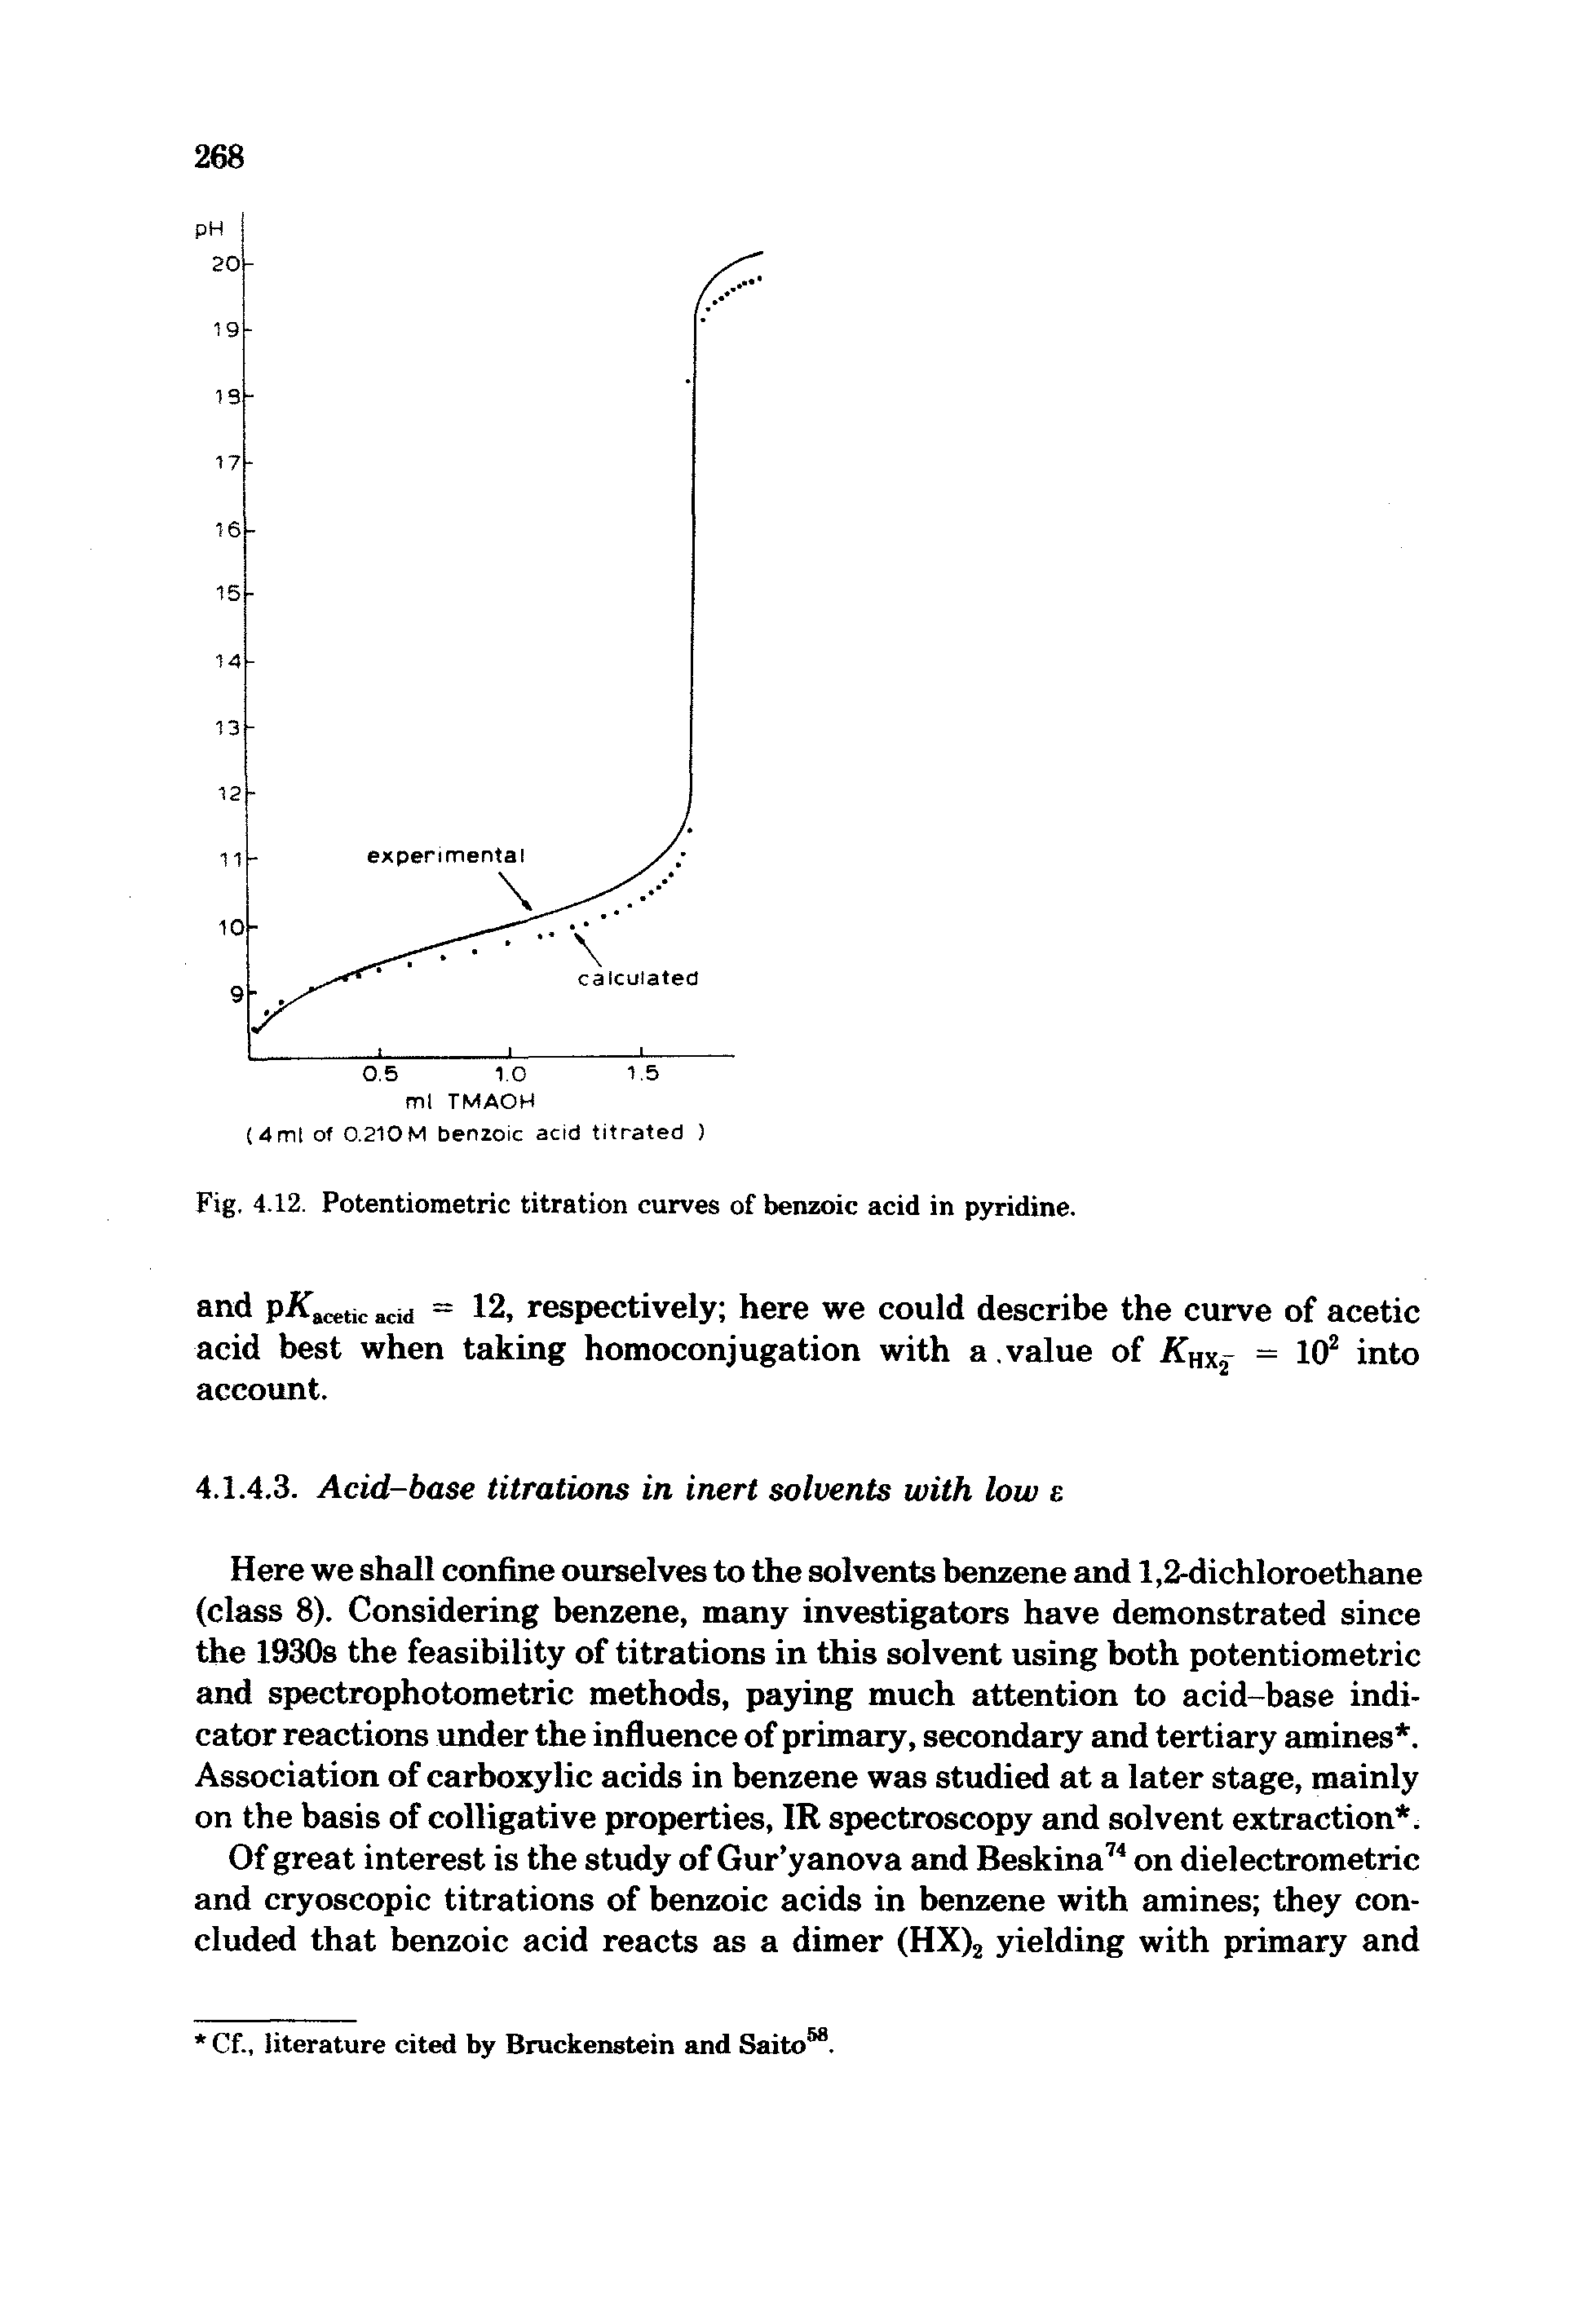 Fig. 4.12. Potentiometric titration curves of benzoic acid in pyridine.